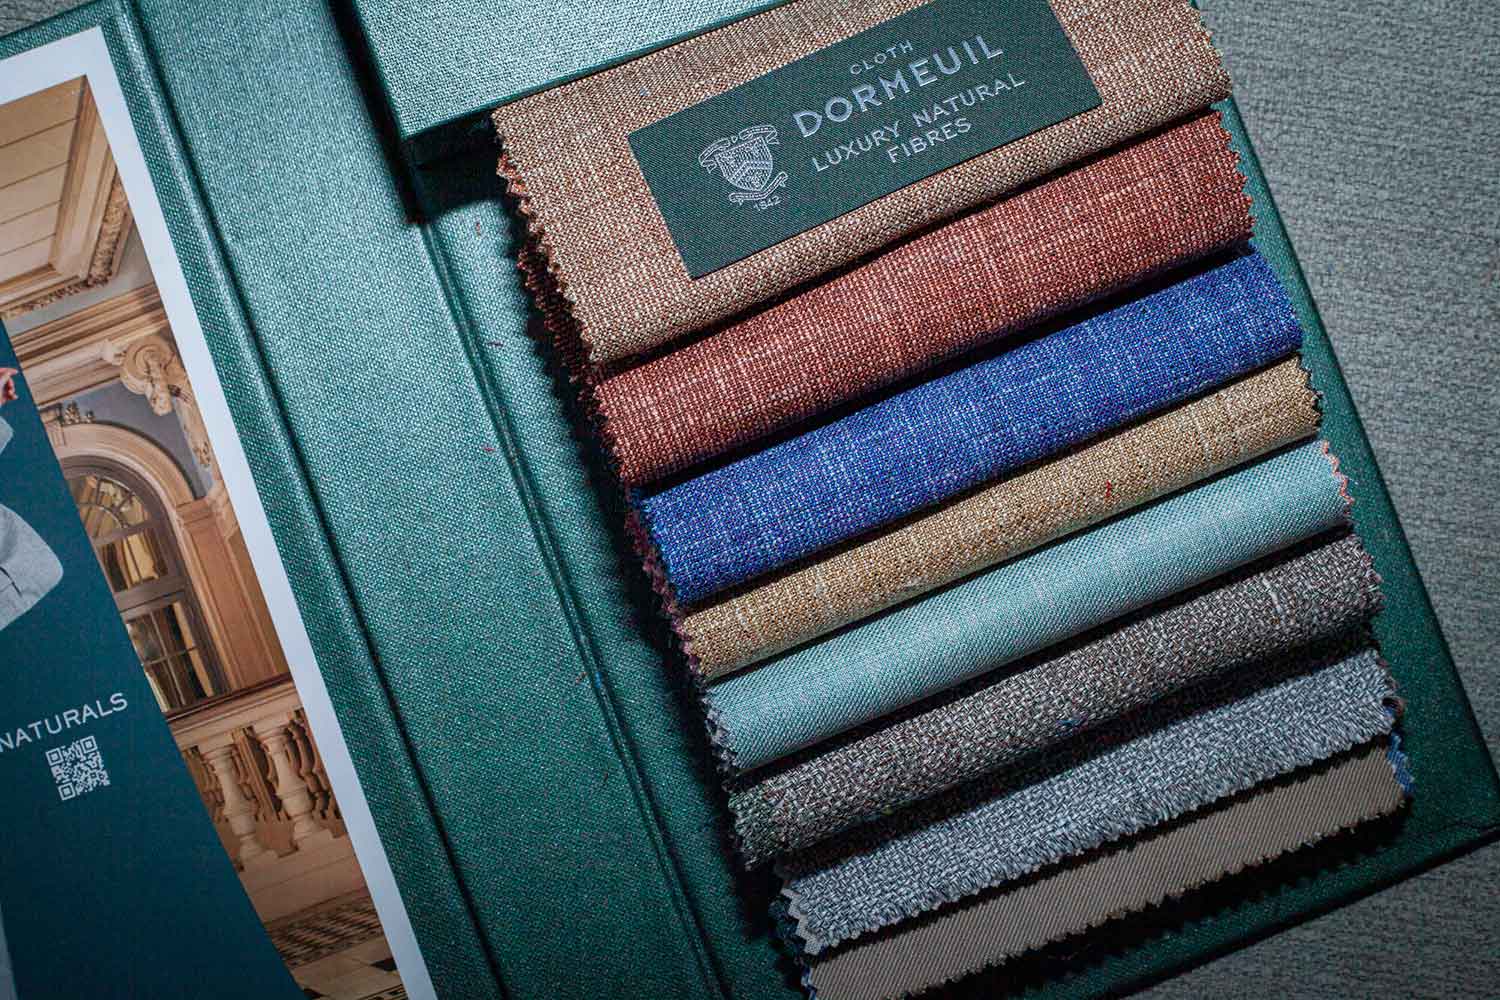 A Dormeuil fabric book with natural fibers